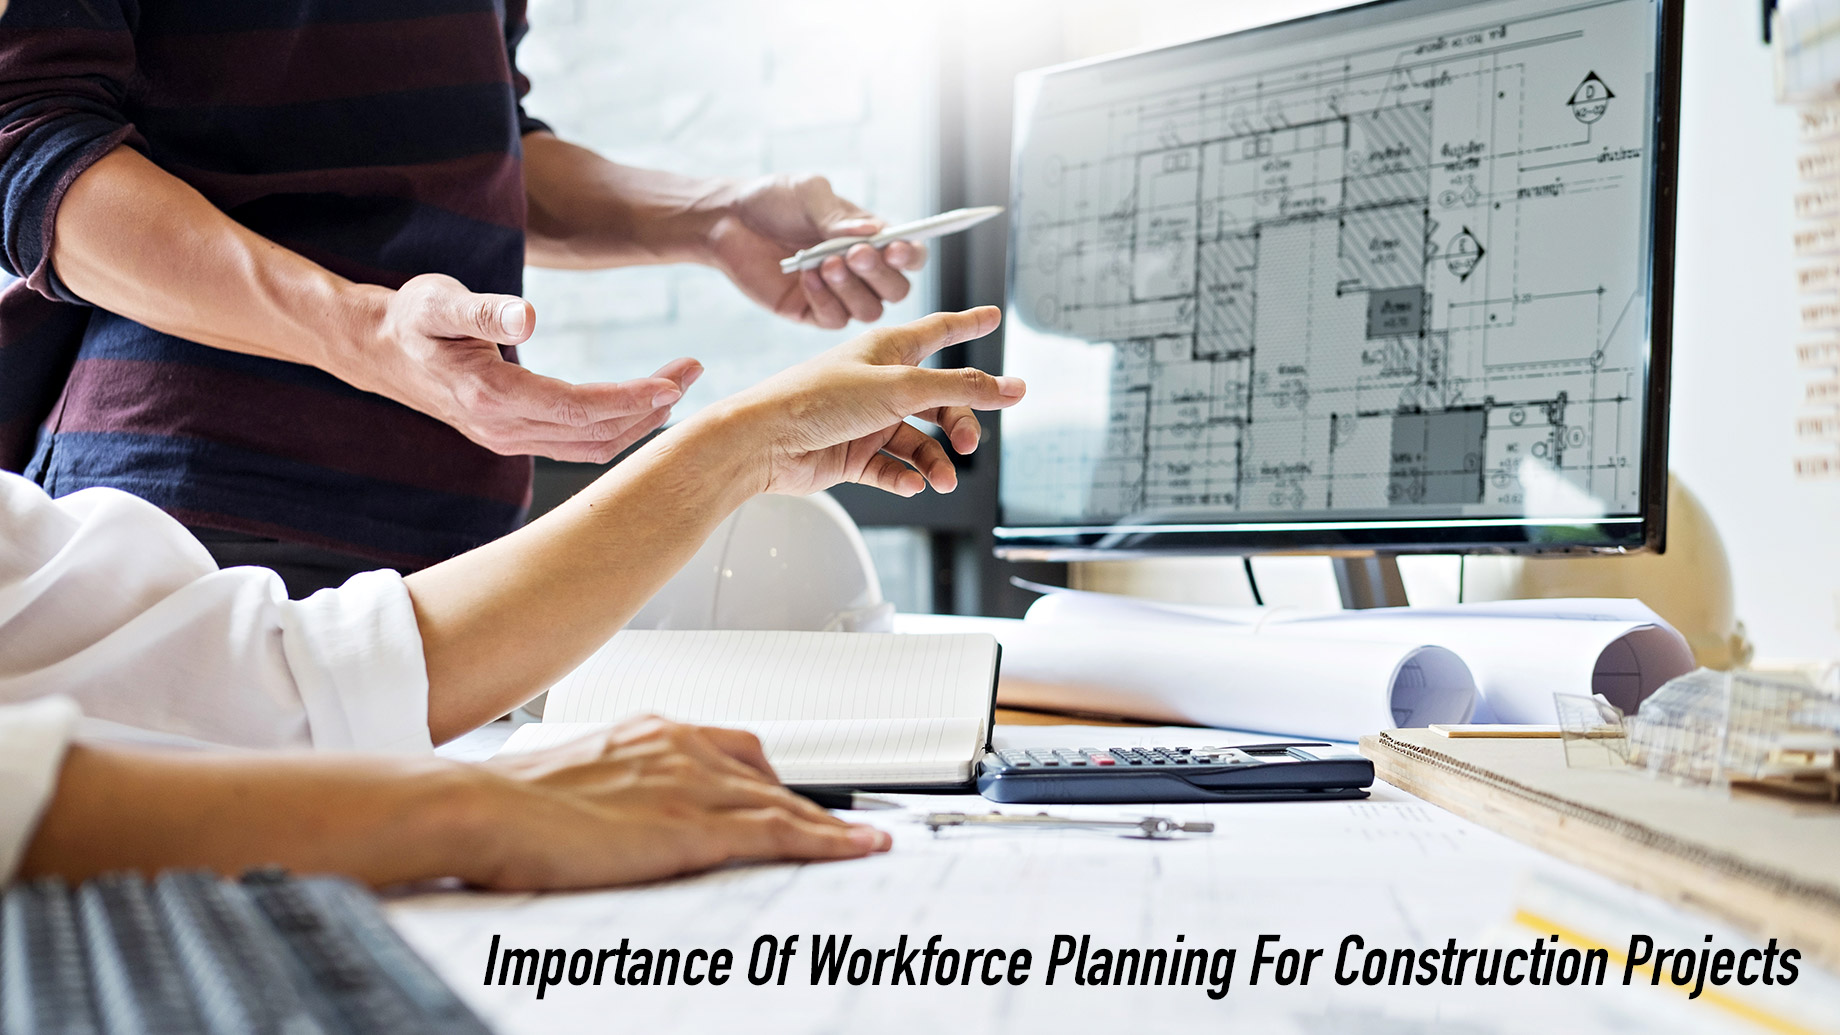 Importance of Workforce Planning for Construction Projects